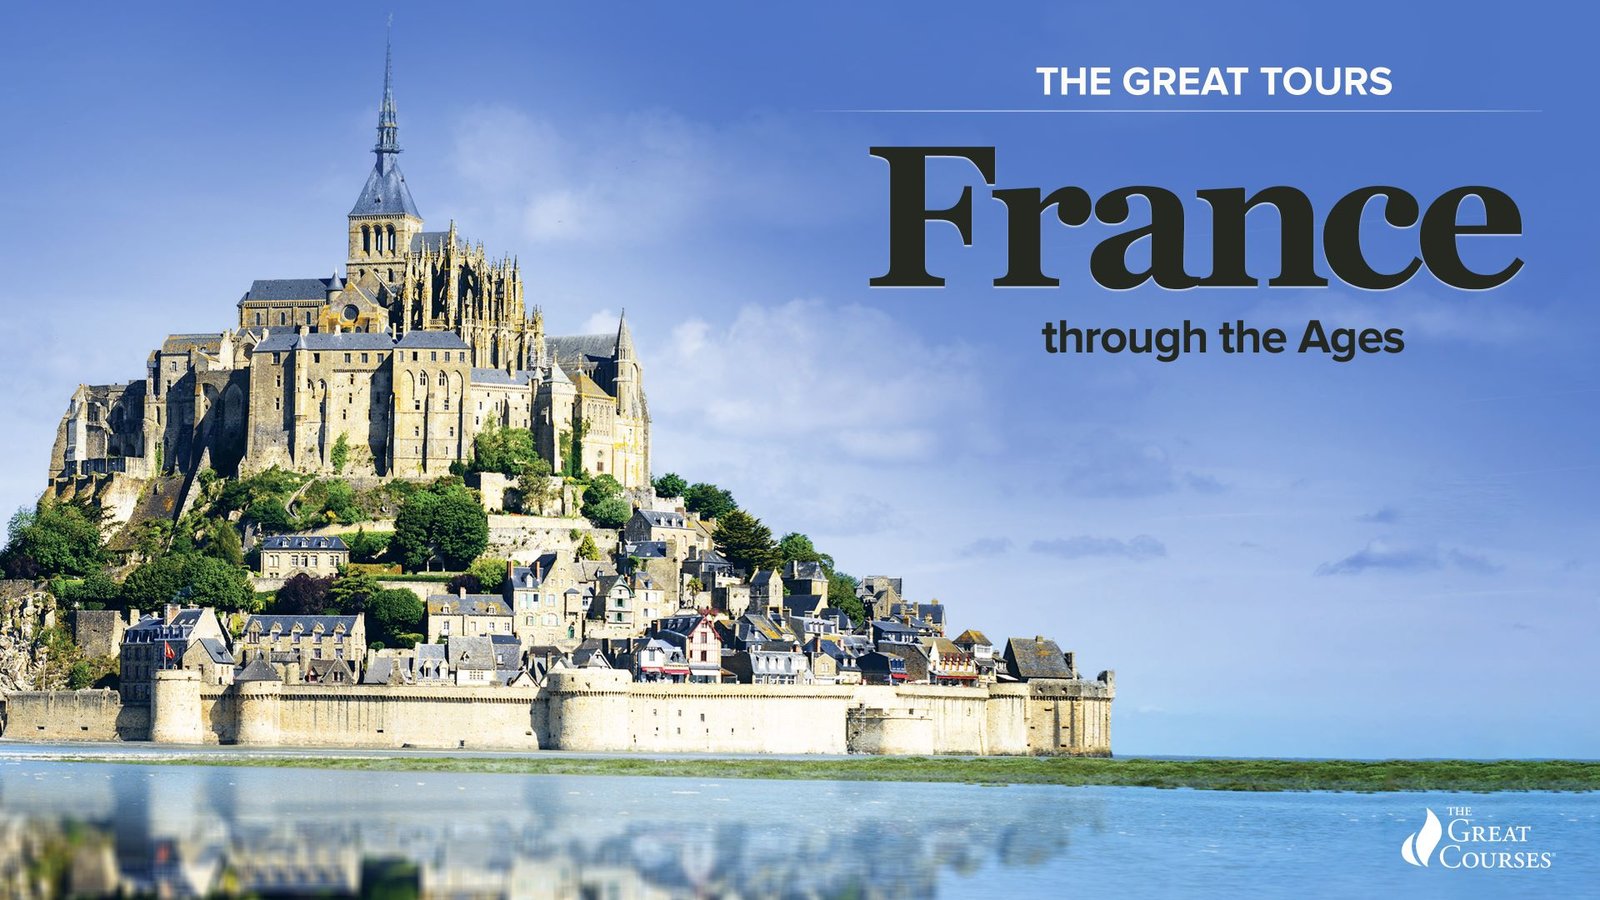 The Great Tours: France through the Ages